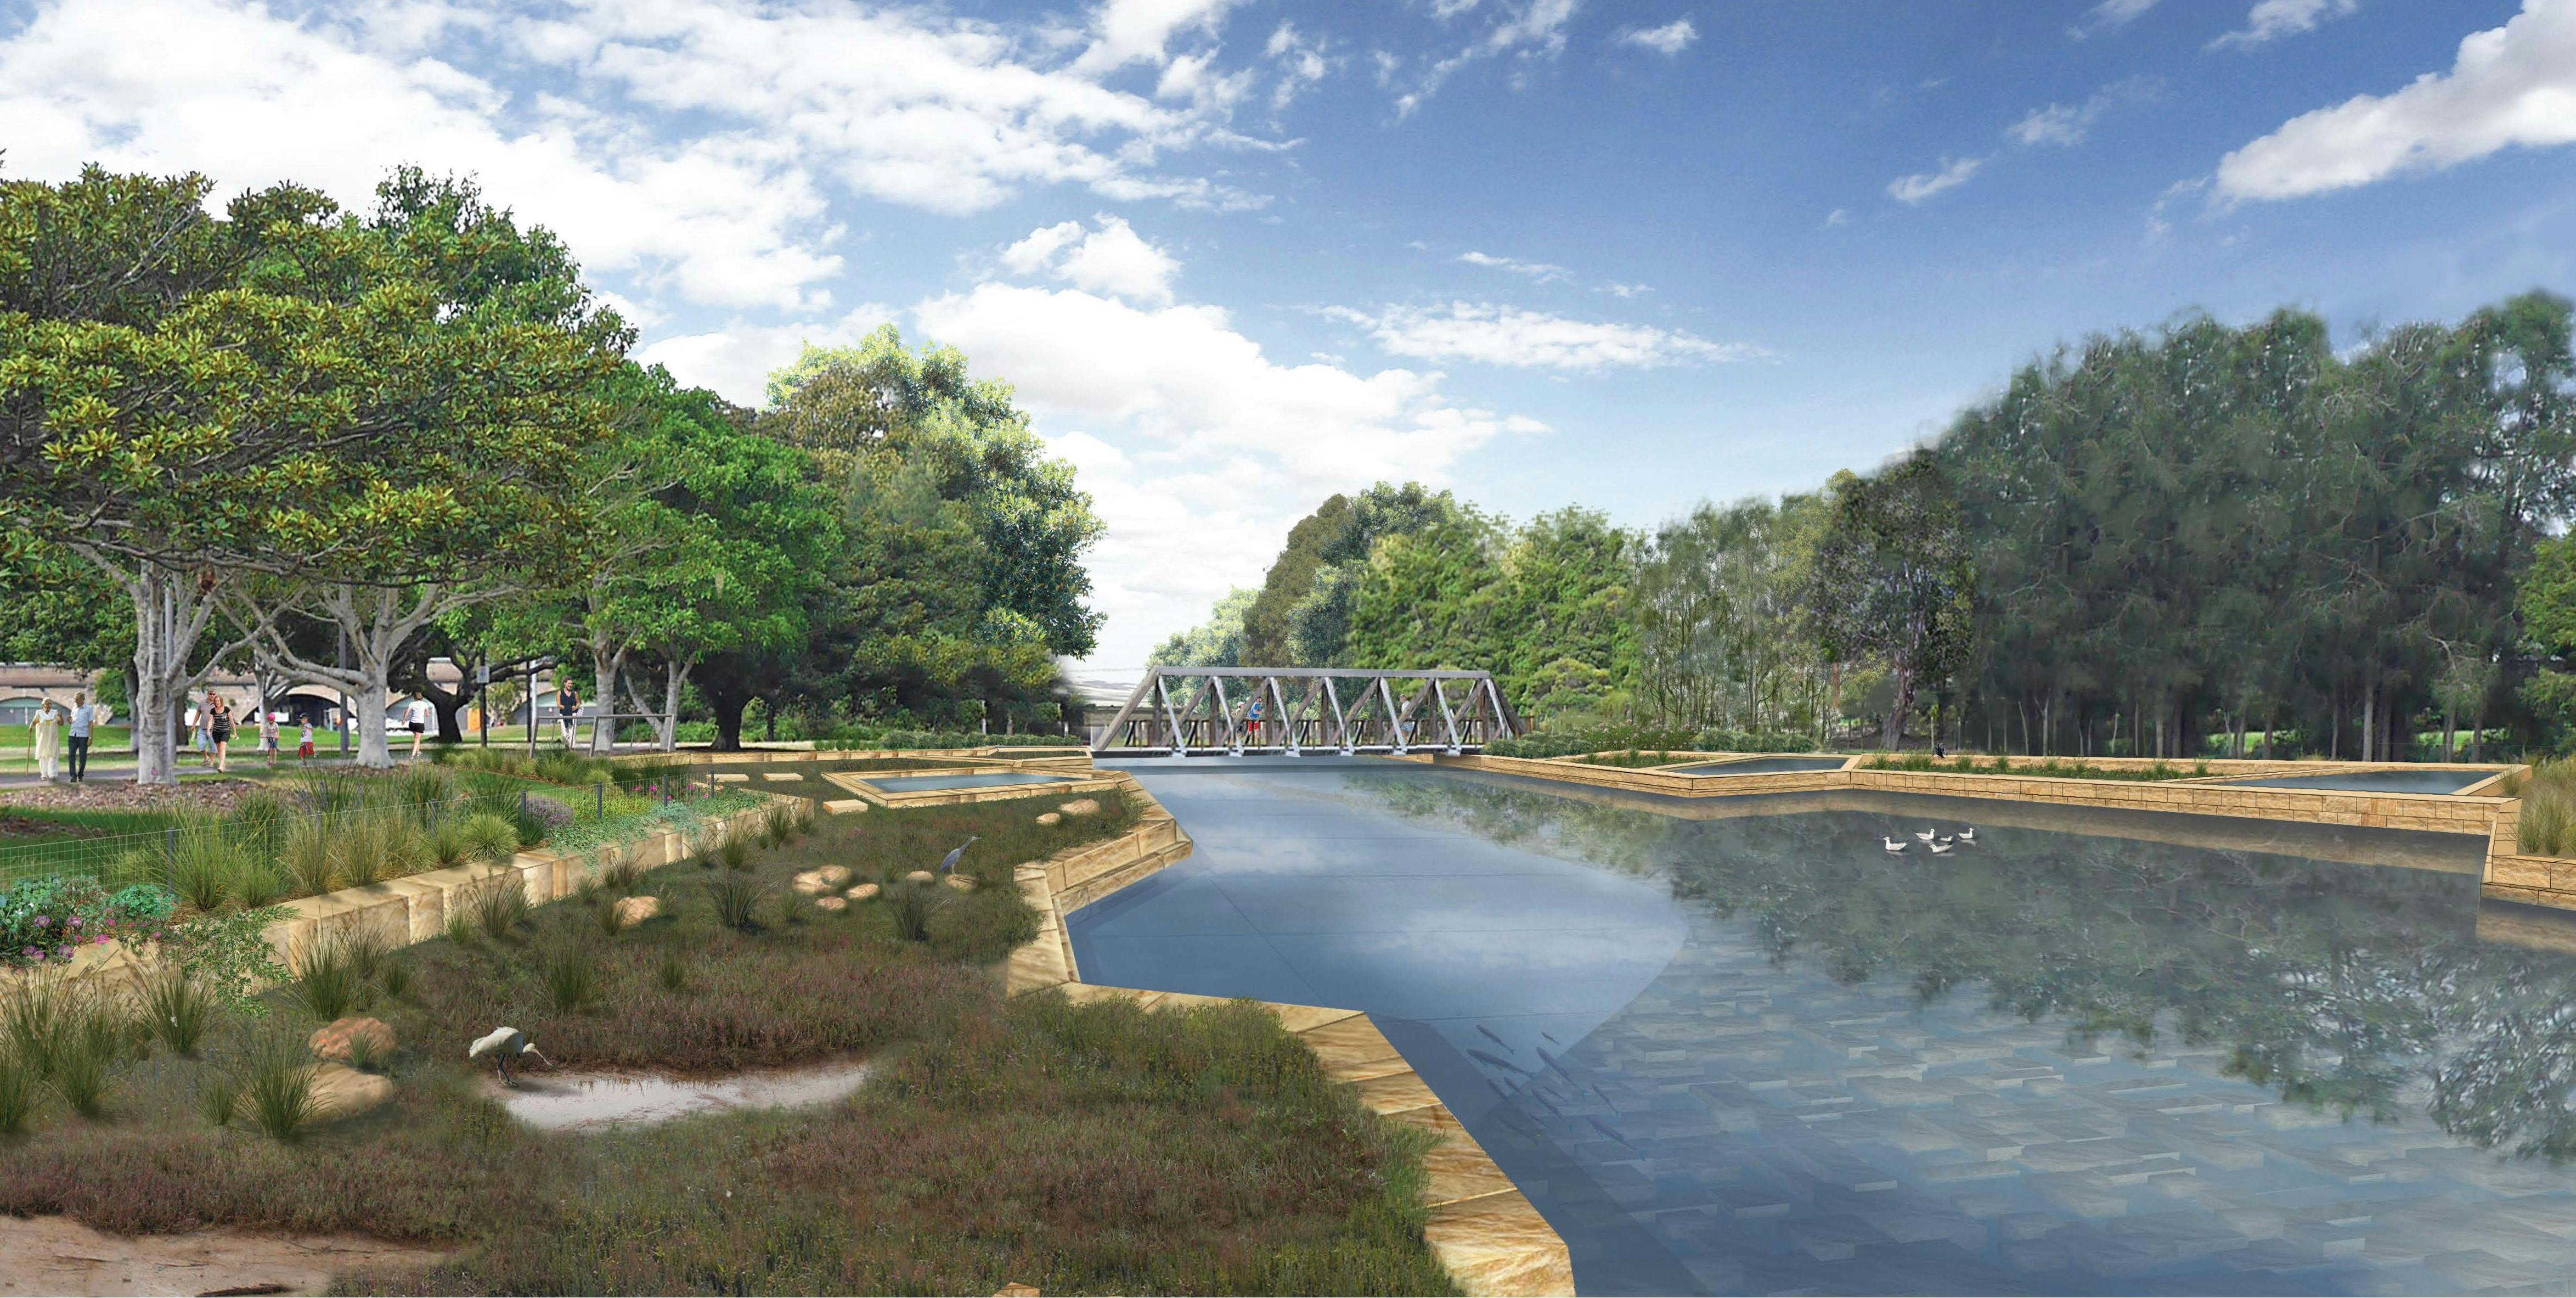 An artist's impression of Johnstons Creek after the naturalisaiton project.